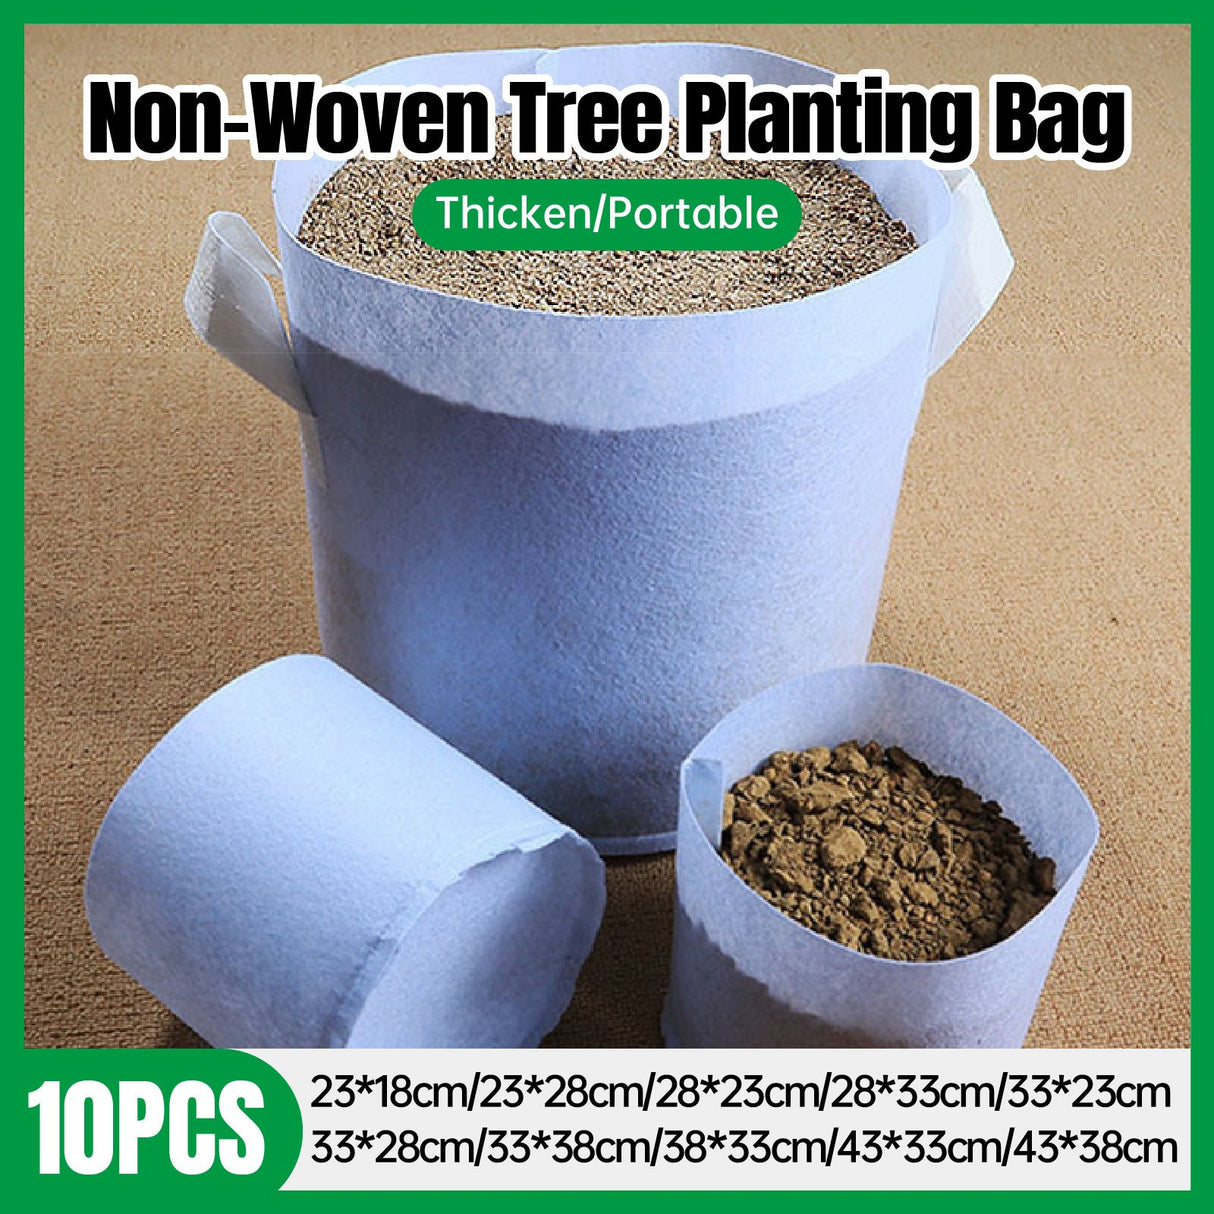 Discover the Benefits of Our Durable Plant Grow Bag